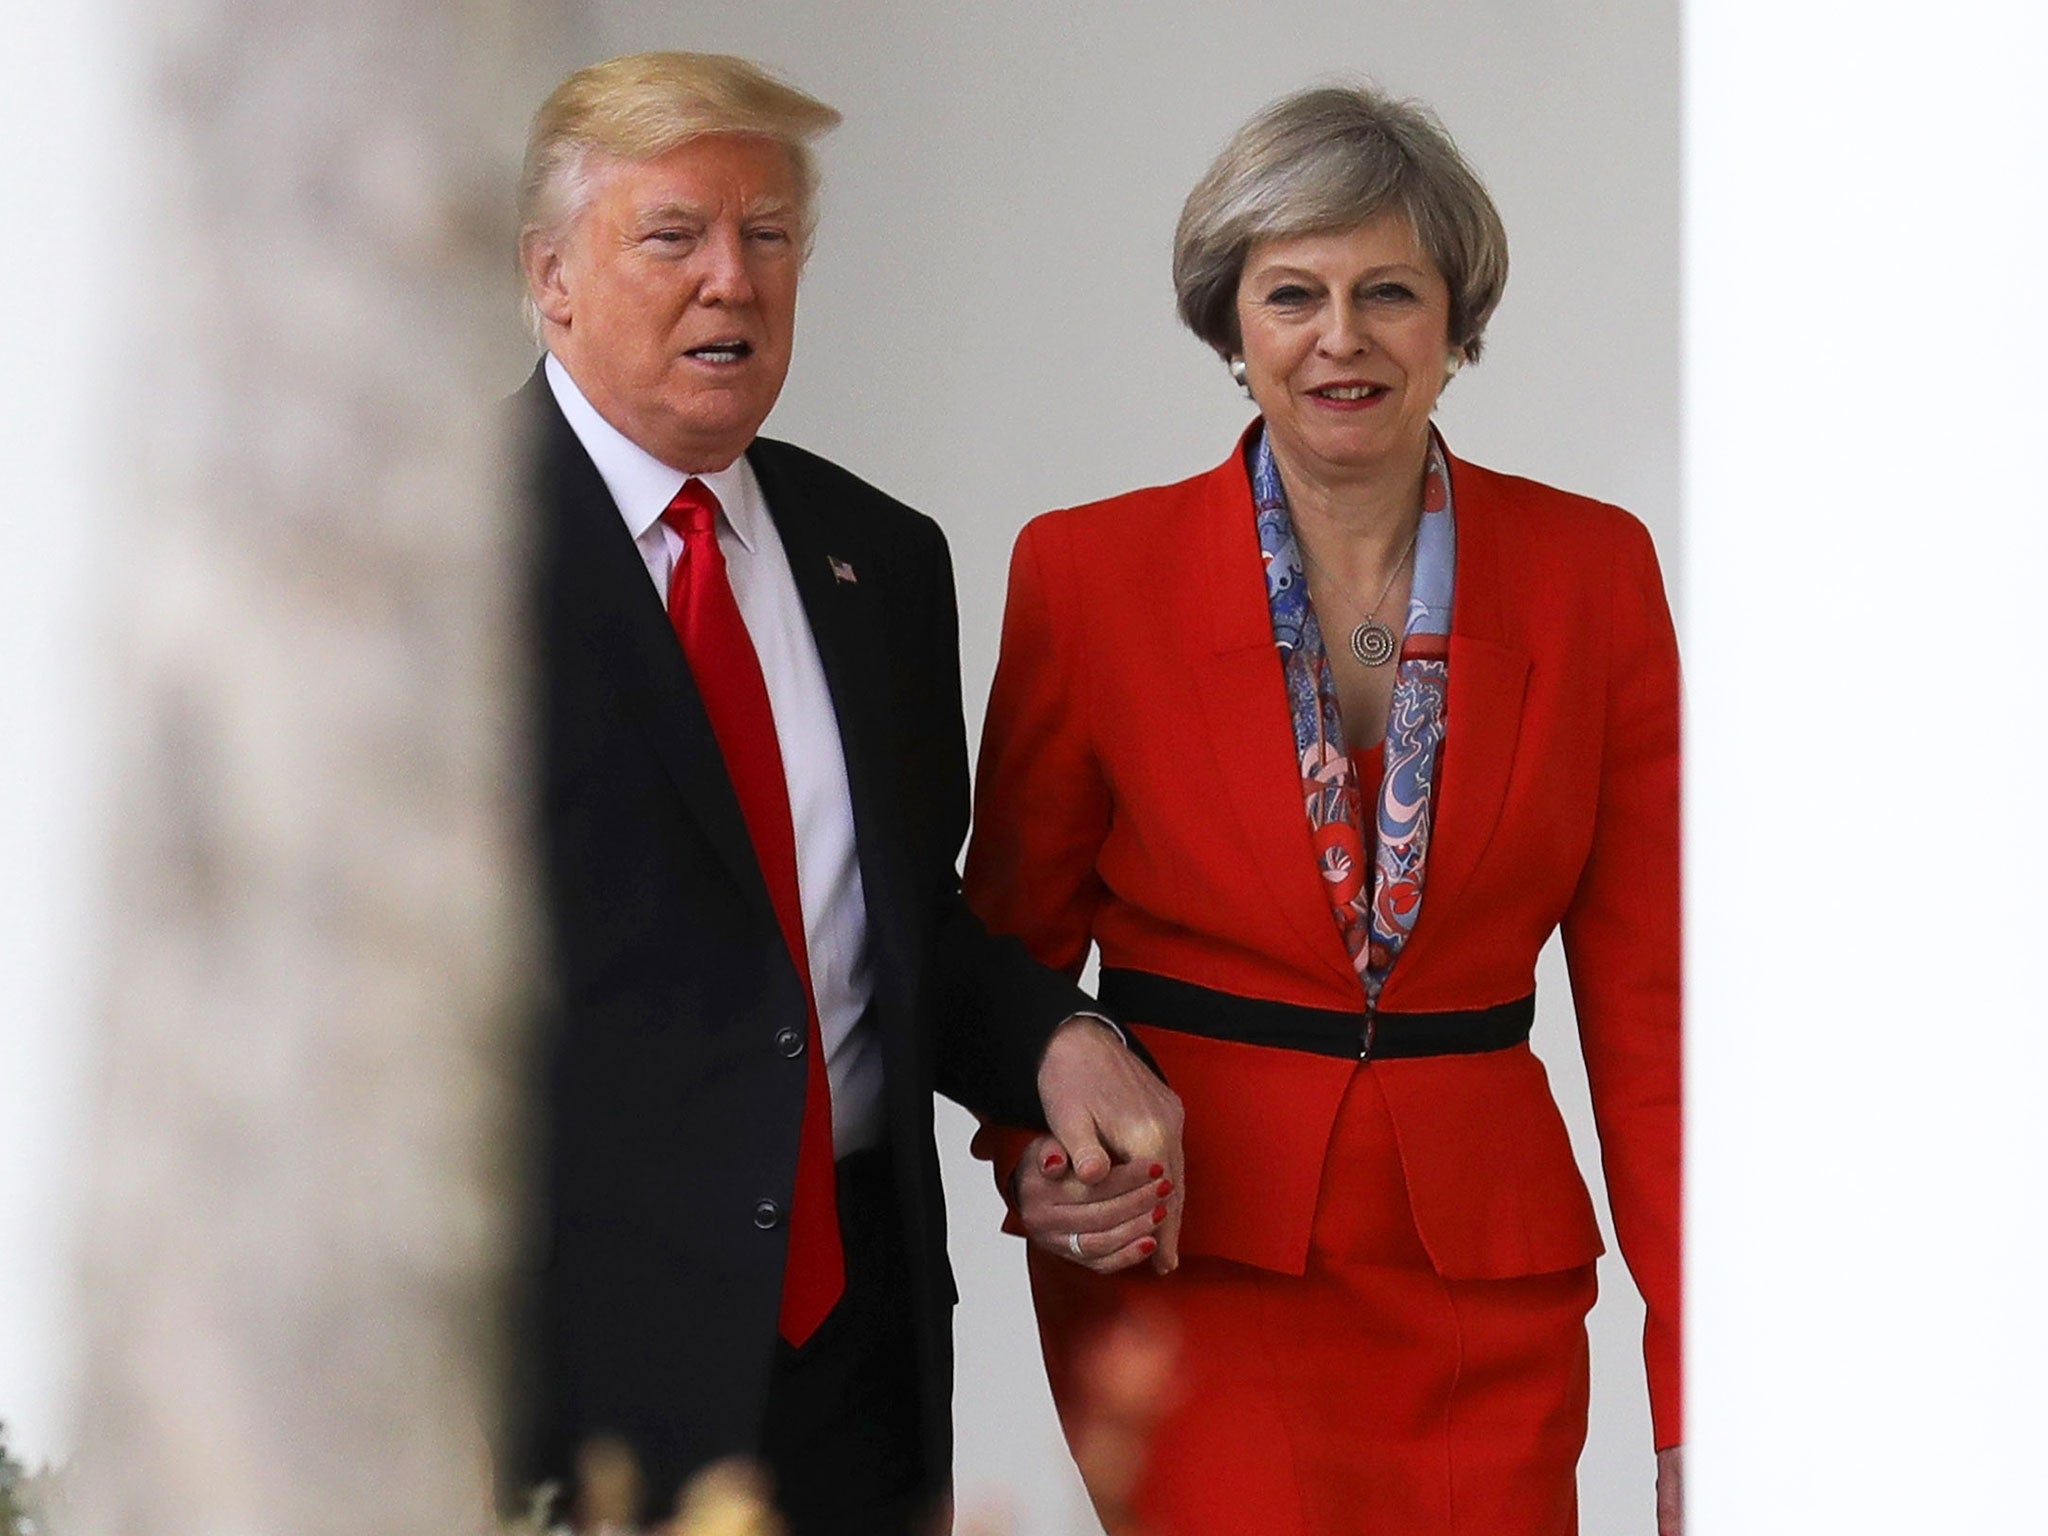 Prime Minister Theresa May with US President Donald Trump walk along The Colonnade at The White House on January 27, 2017